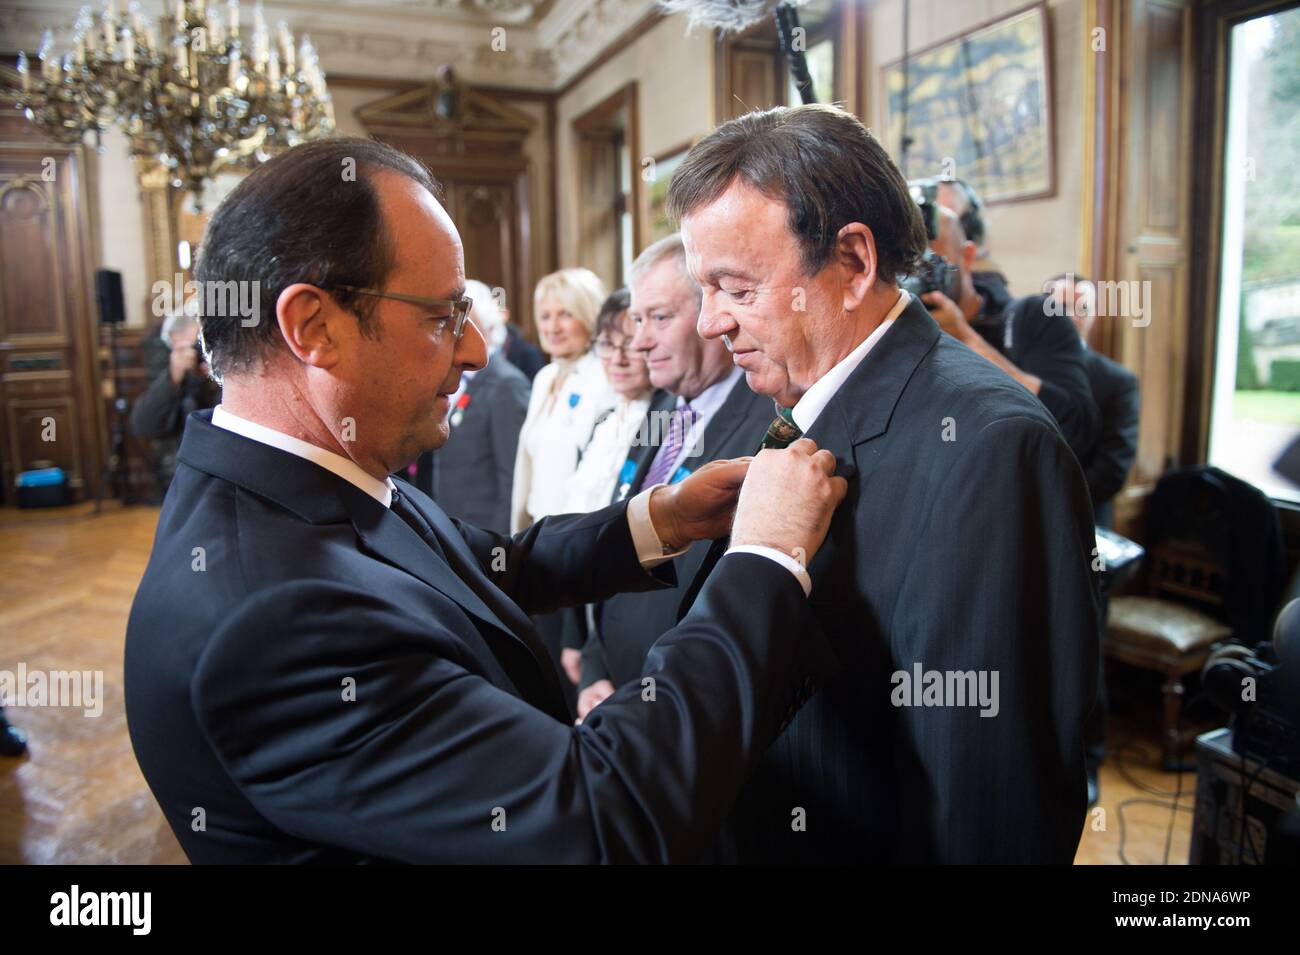 French President Francois Hollande holds a medal of Legion of Honor to Marc Boisseuil, Jean-Claude Boisdevesy, Pierre Mamers, Edith Perrier, Jean-Claude Talbert, Michelle Laurent-Bruzy, Patricia Broussole, Jean-Louis Chassaing, Fredy Dumas, during an award ceremony in Tulle, France, on January 17, 2015. Photo by Laurent Chamussy/Pool/ABACAPRESS.COM Stock Photo